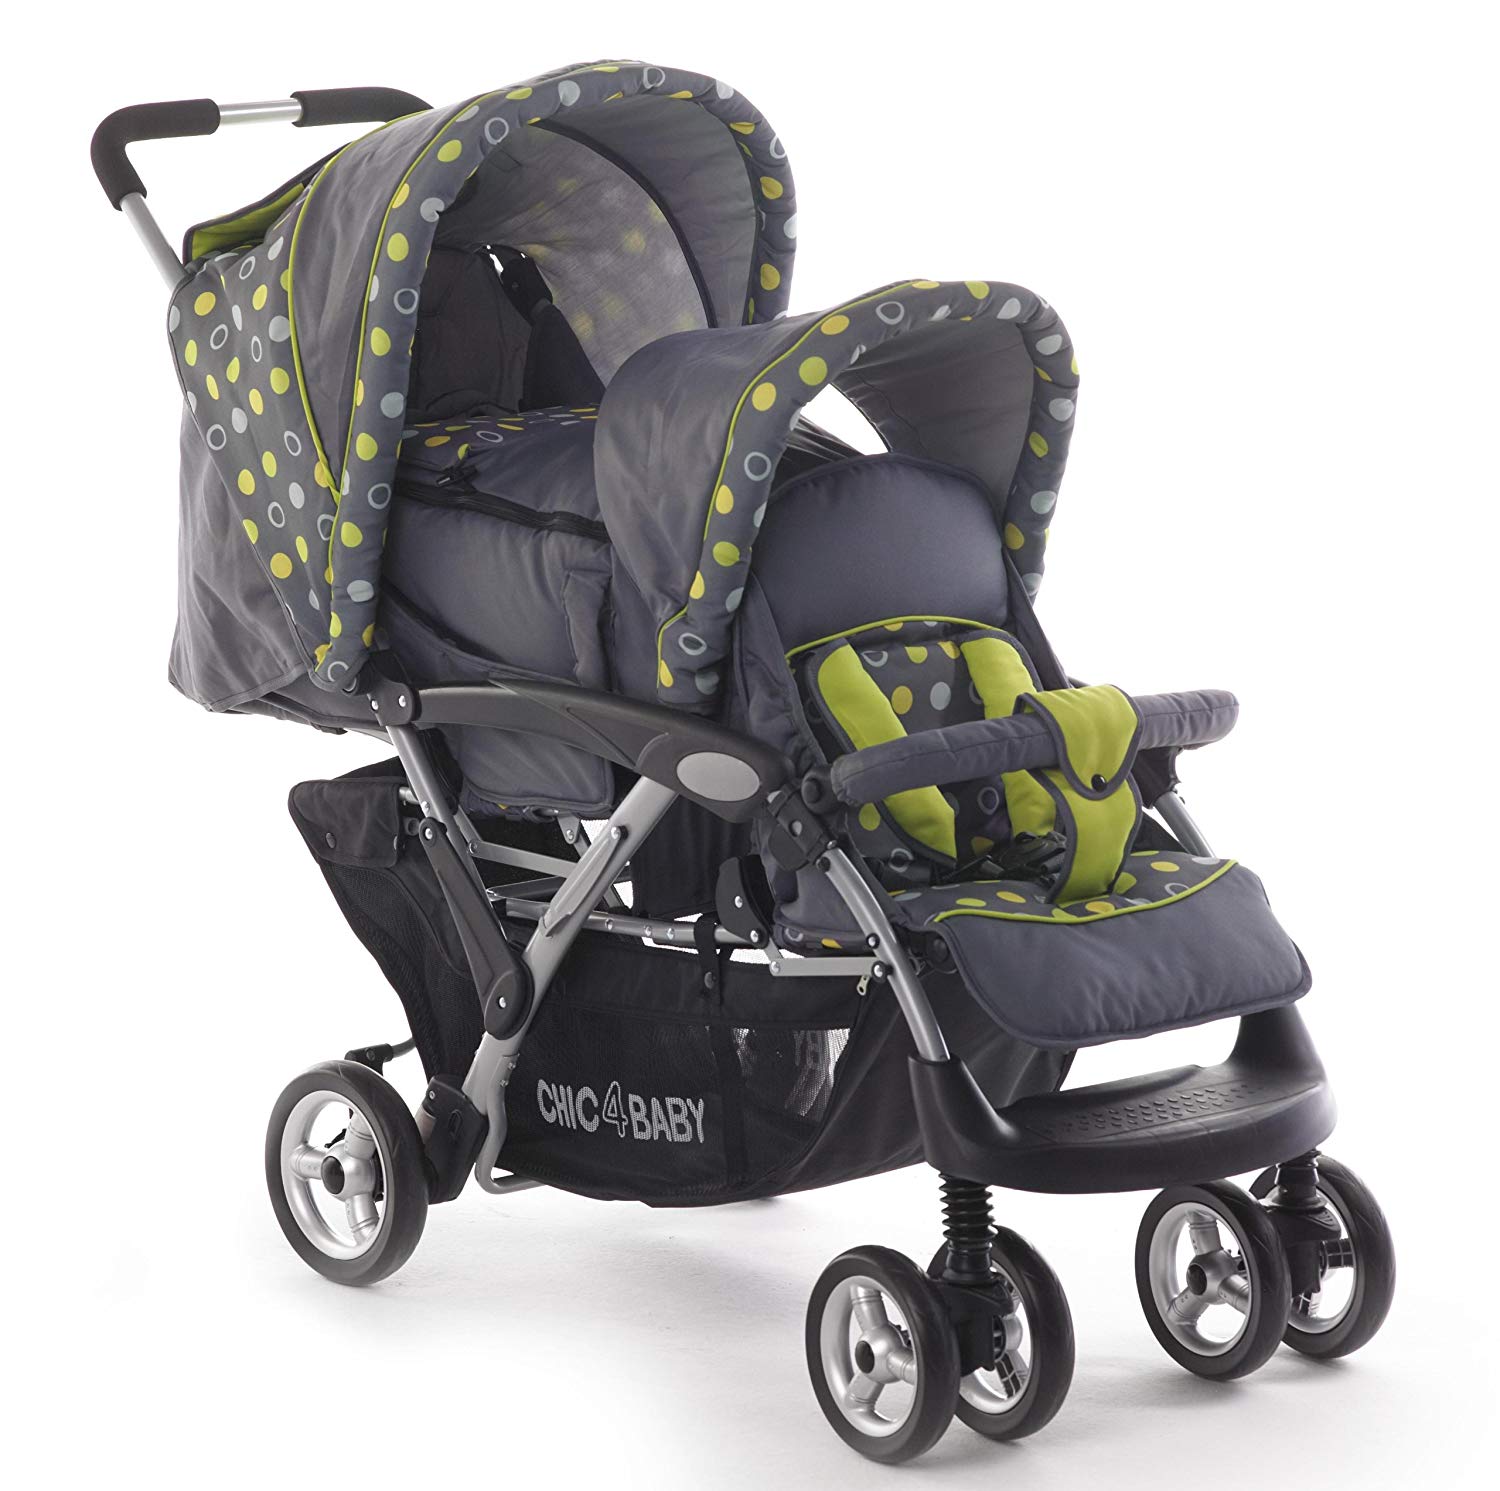 Chic 4 Baby DUO Terranova 274 42 Double Pram with Carry Bag and Rain Cover